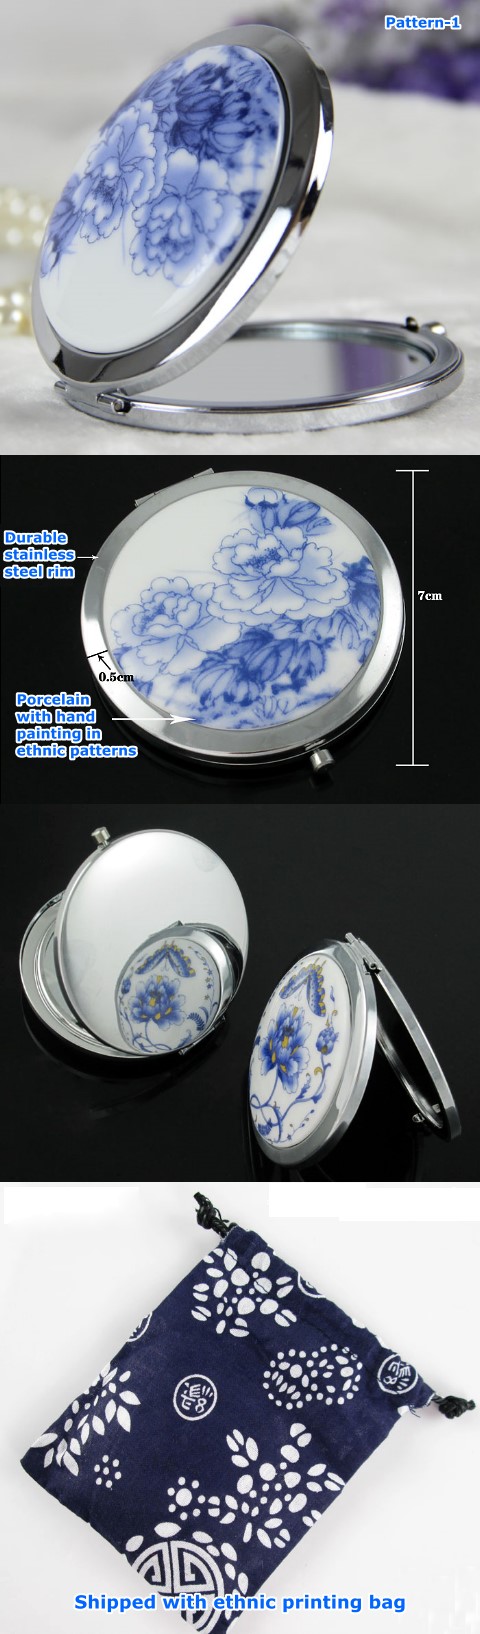 Hand Painting Compact Mirror (Multi-pattern)